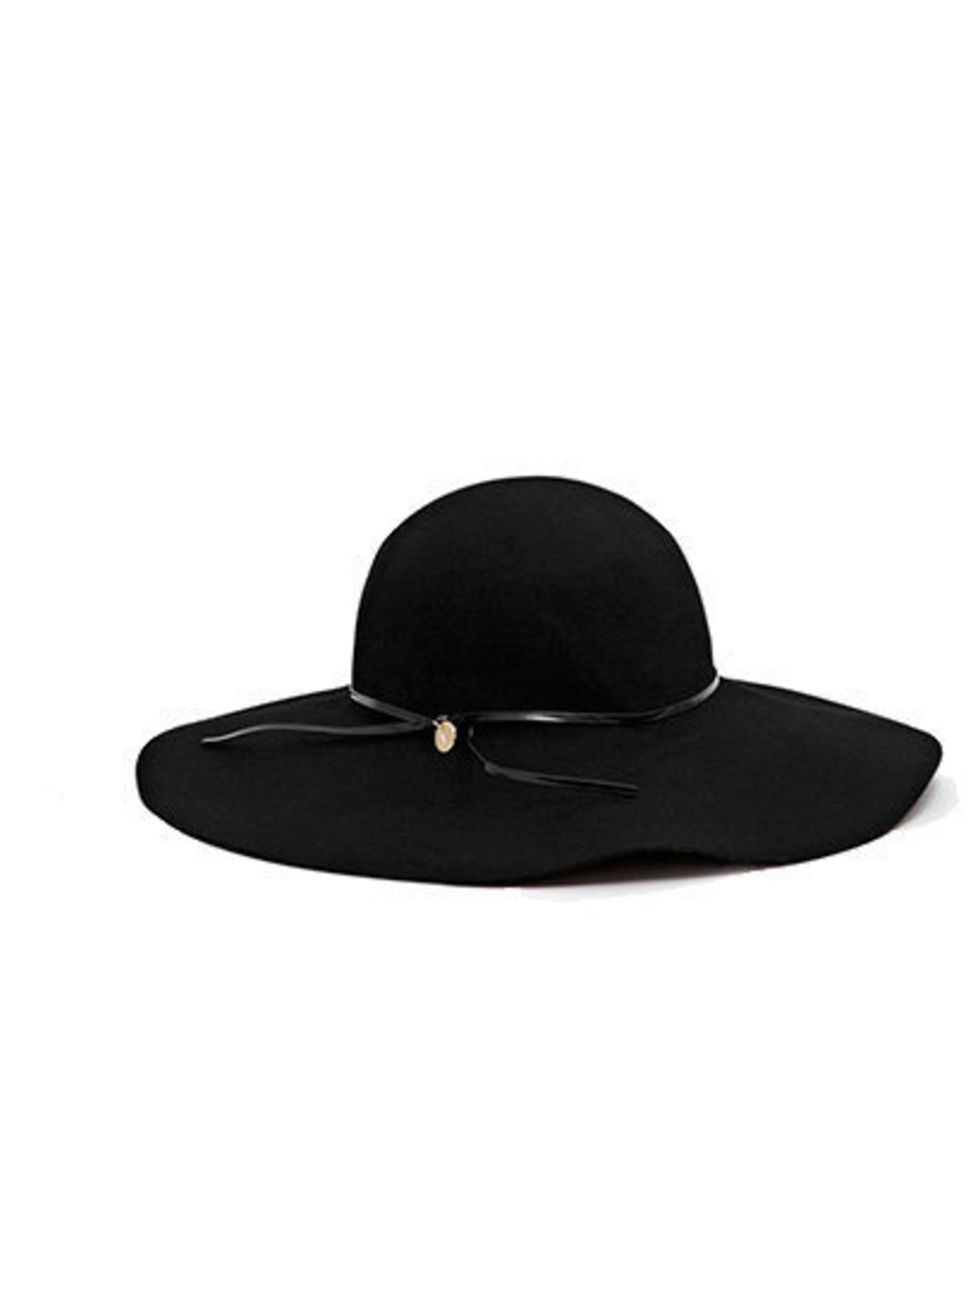 Fashion assistant Espe would like to add to her hat collection, French Connection £50.